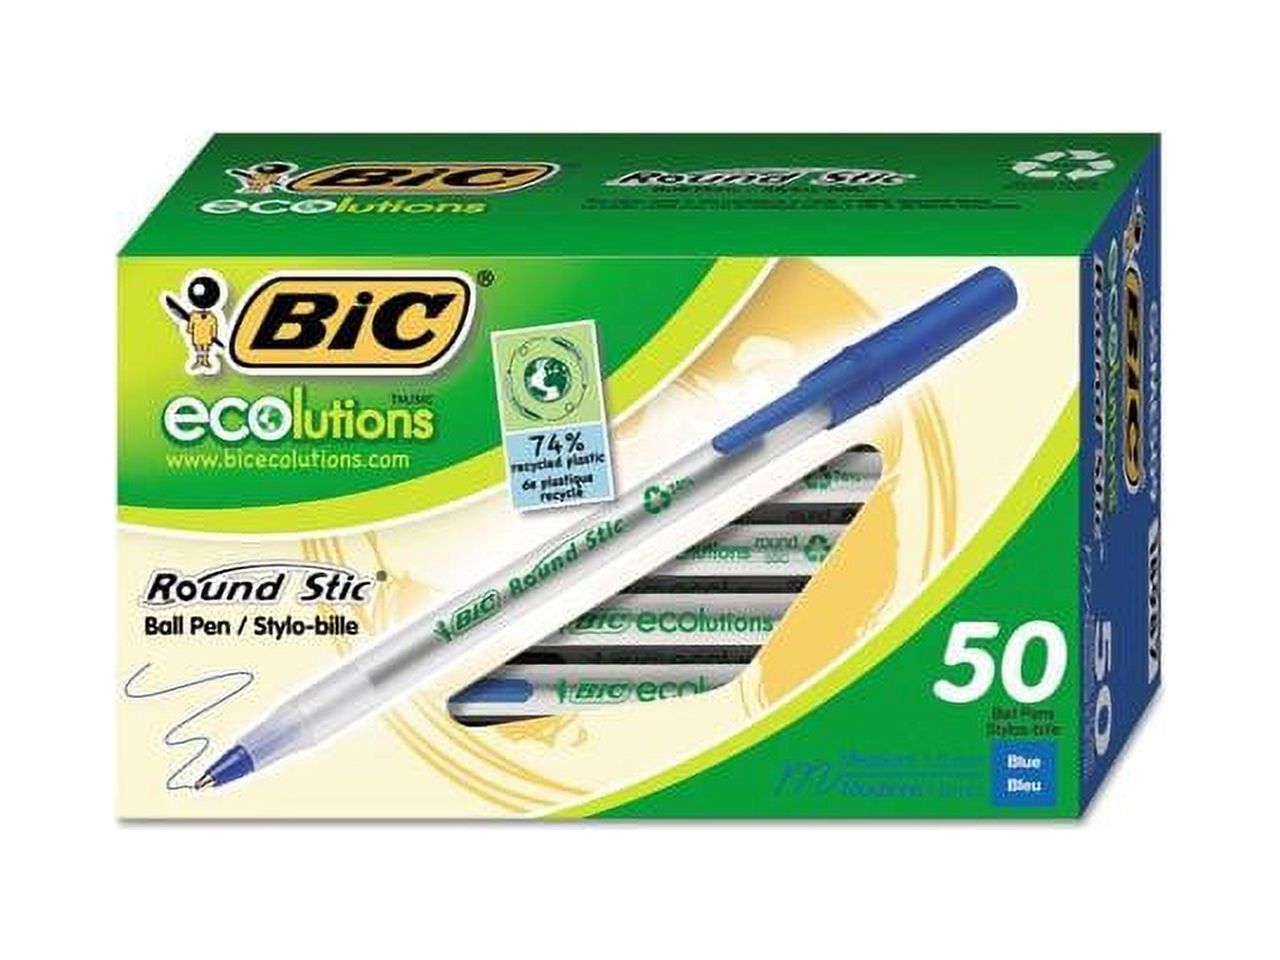 BIC Ecolutions Round Stic Ball Pen, Medium Point, Blue, 50-Count - image 3 of 8